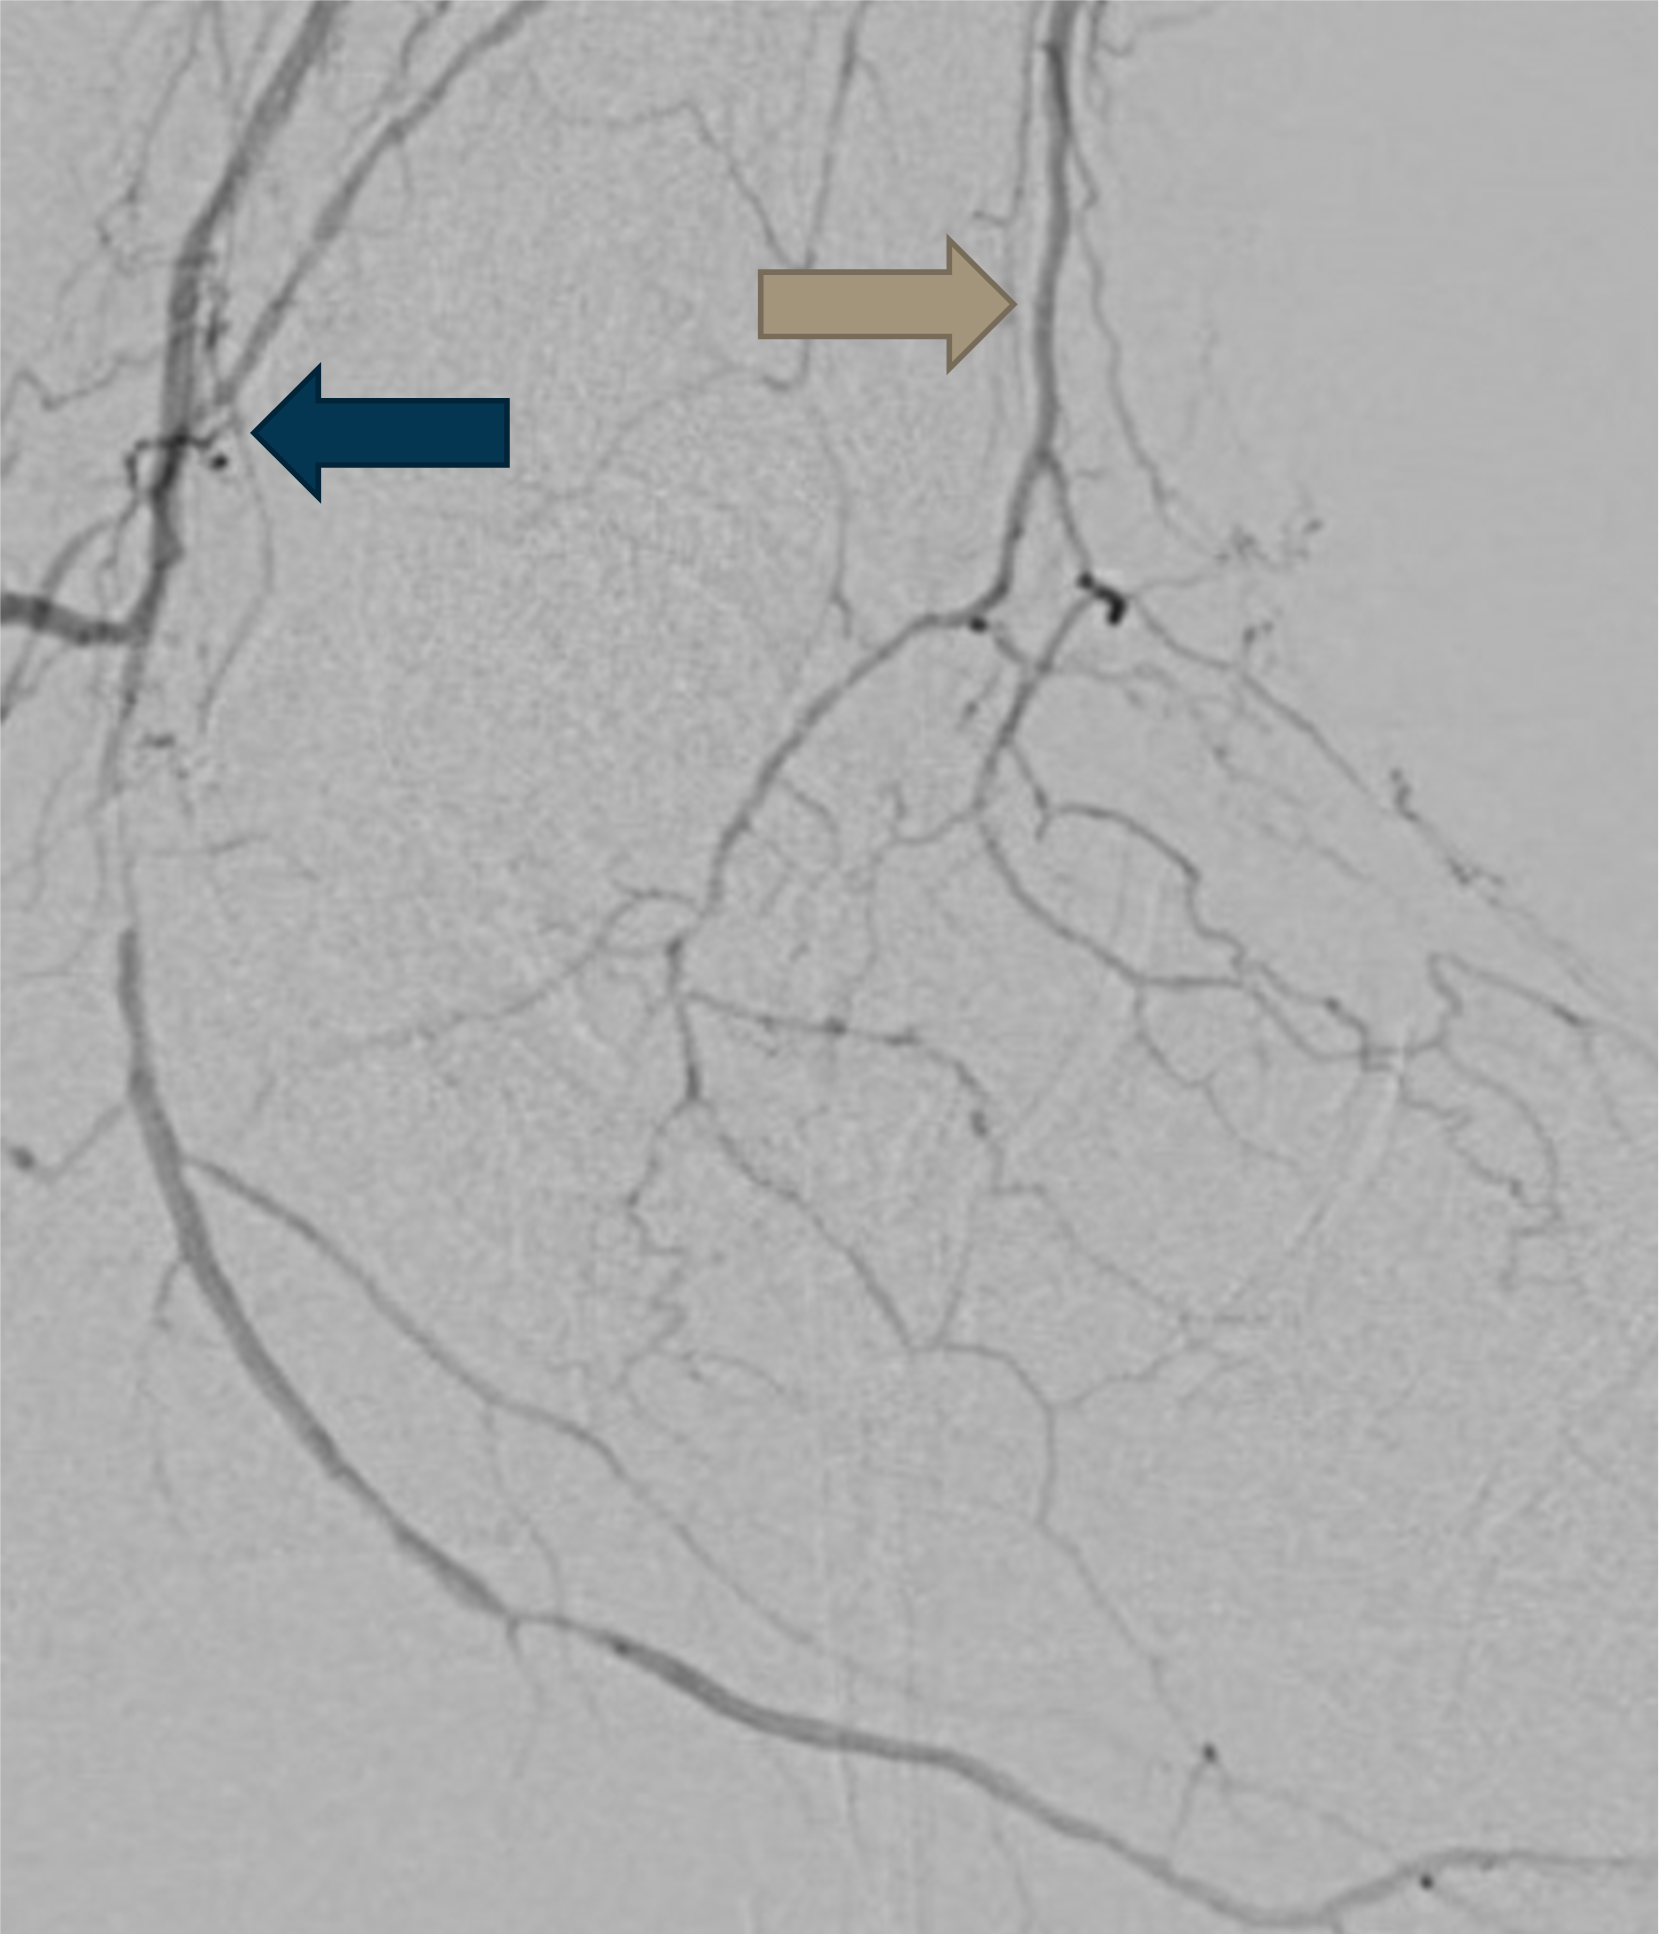 Figure 3. Angiogram showing occlusion of the common plantar artery and dorsalis pedis artery. The PTA and ATA pulses were palpable.